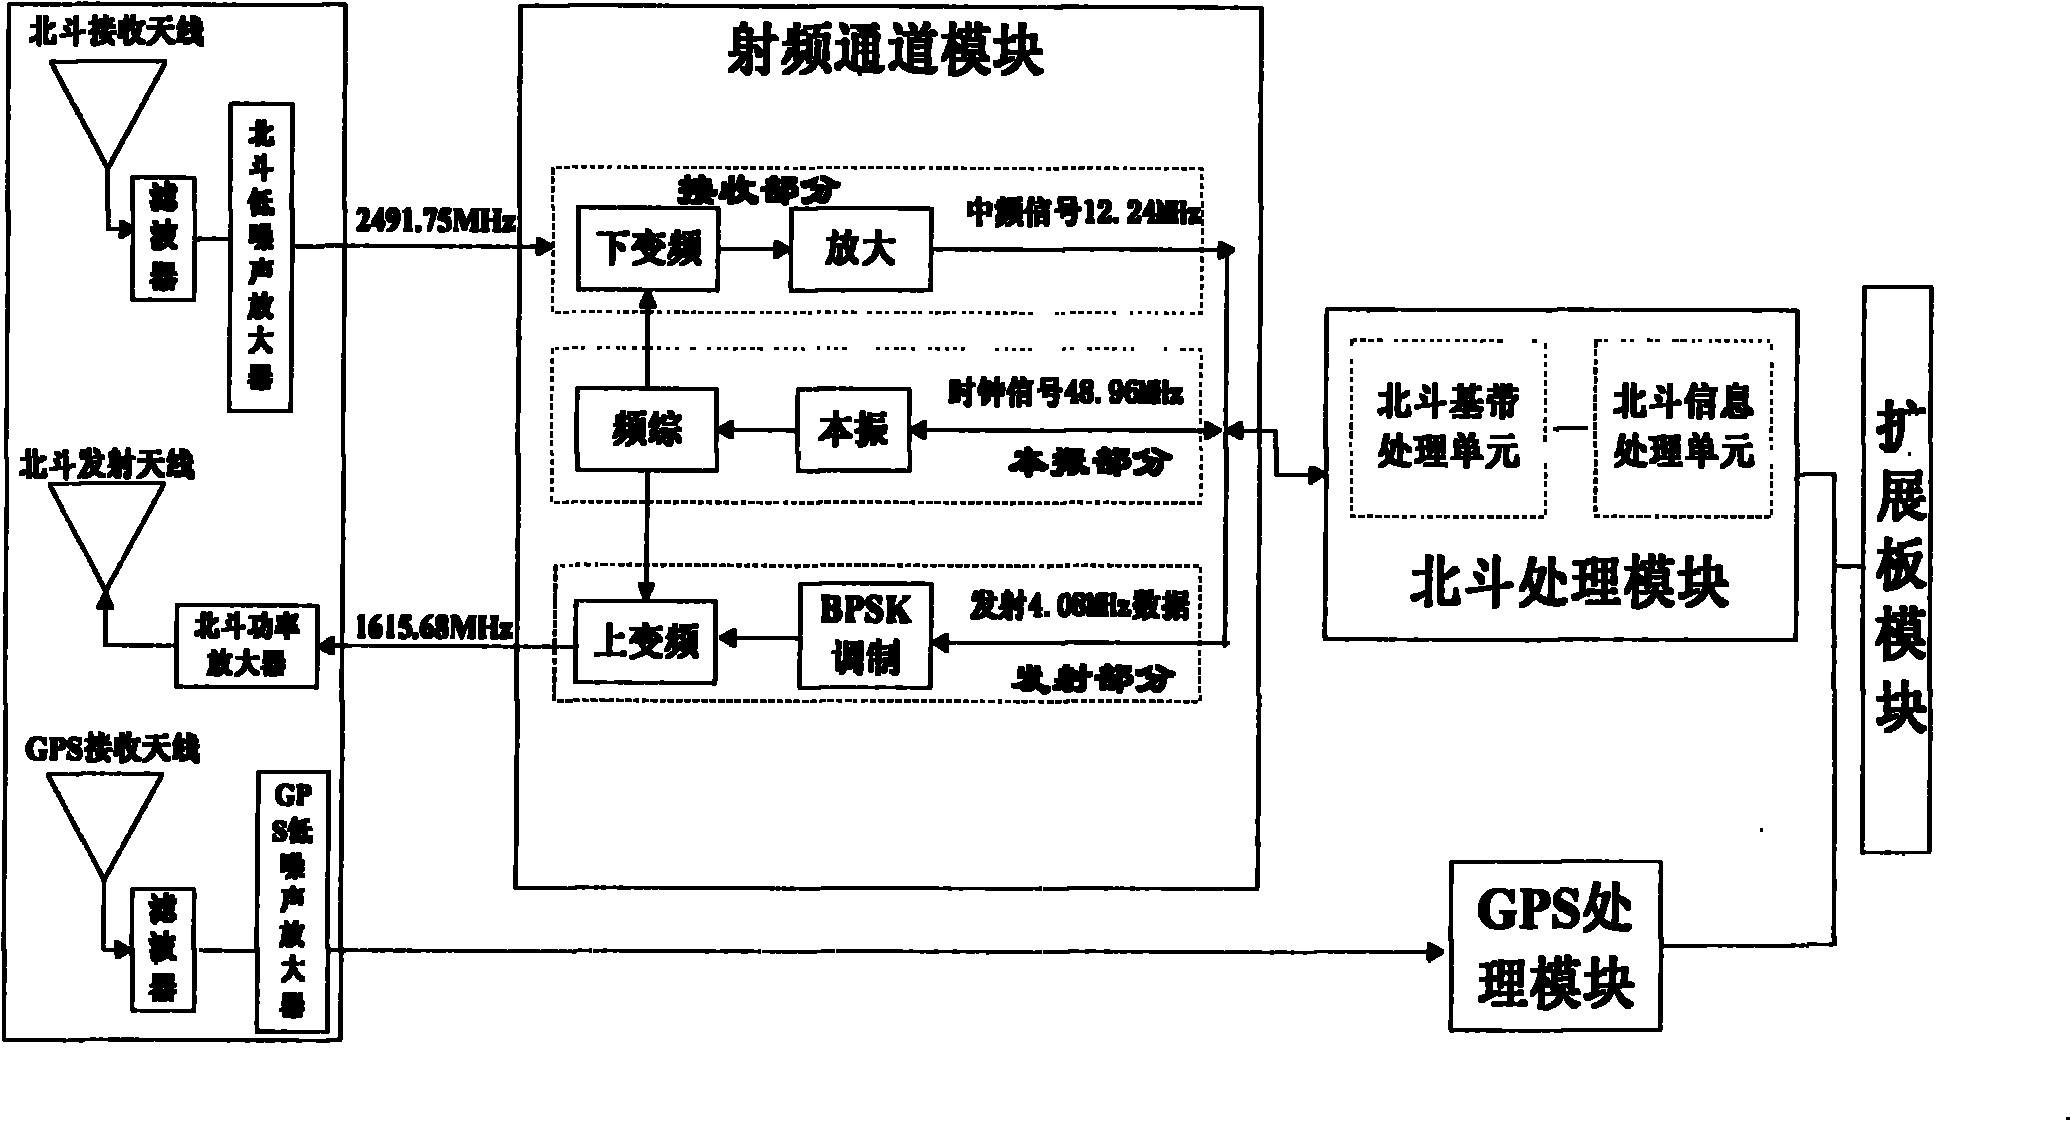 Dual-mode positioning time-service type receiver for compass satellite and global positioning system (GPS) satellite